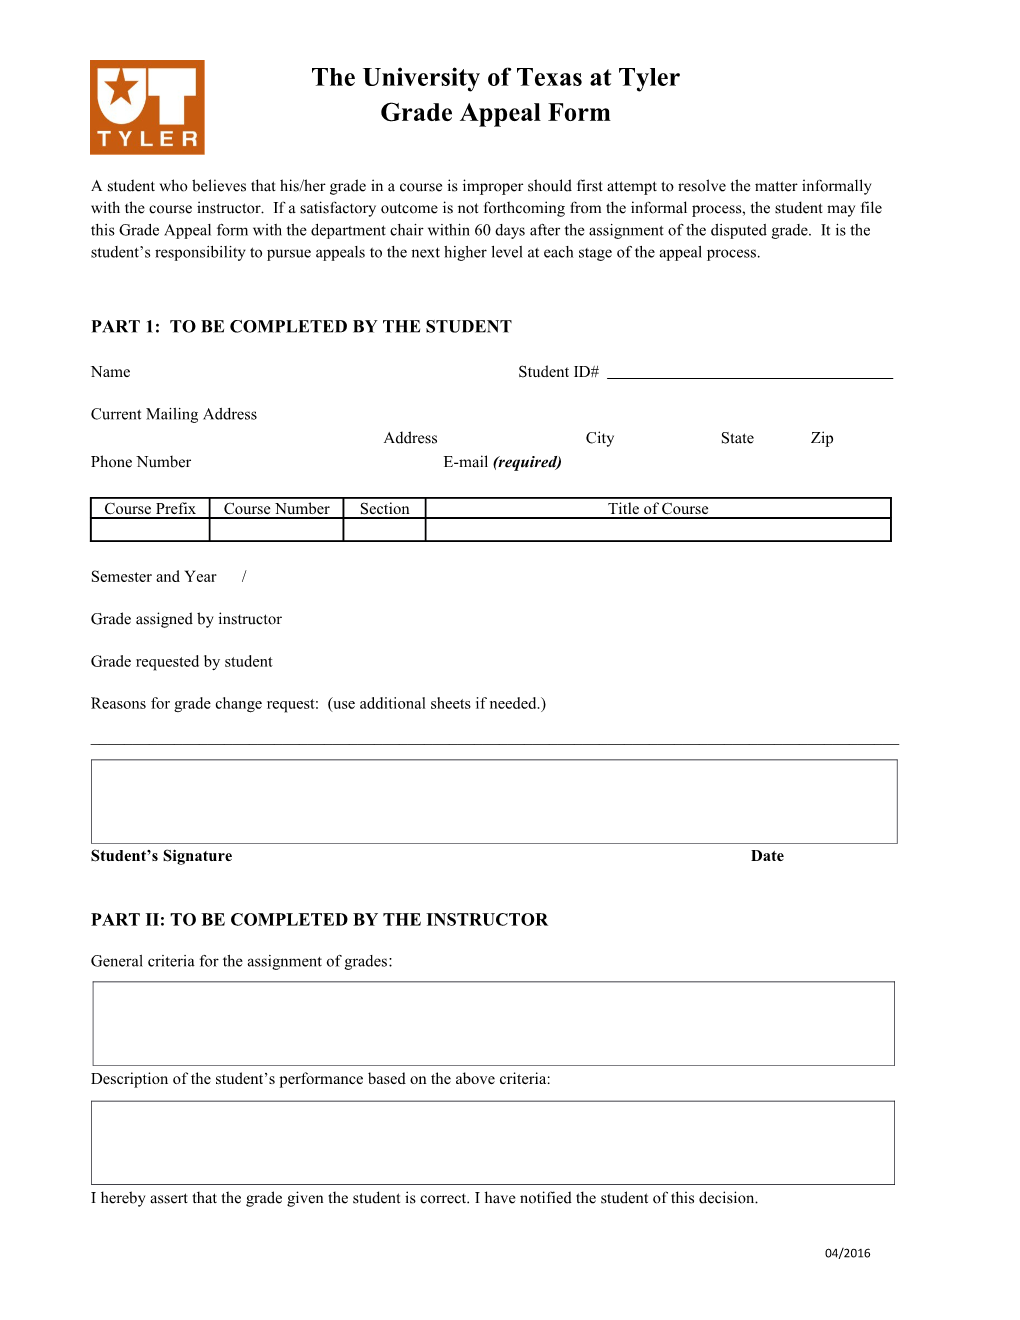 The University of Texas at Tyler Grade Appeal Form